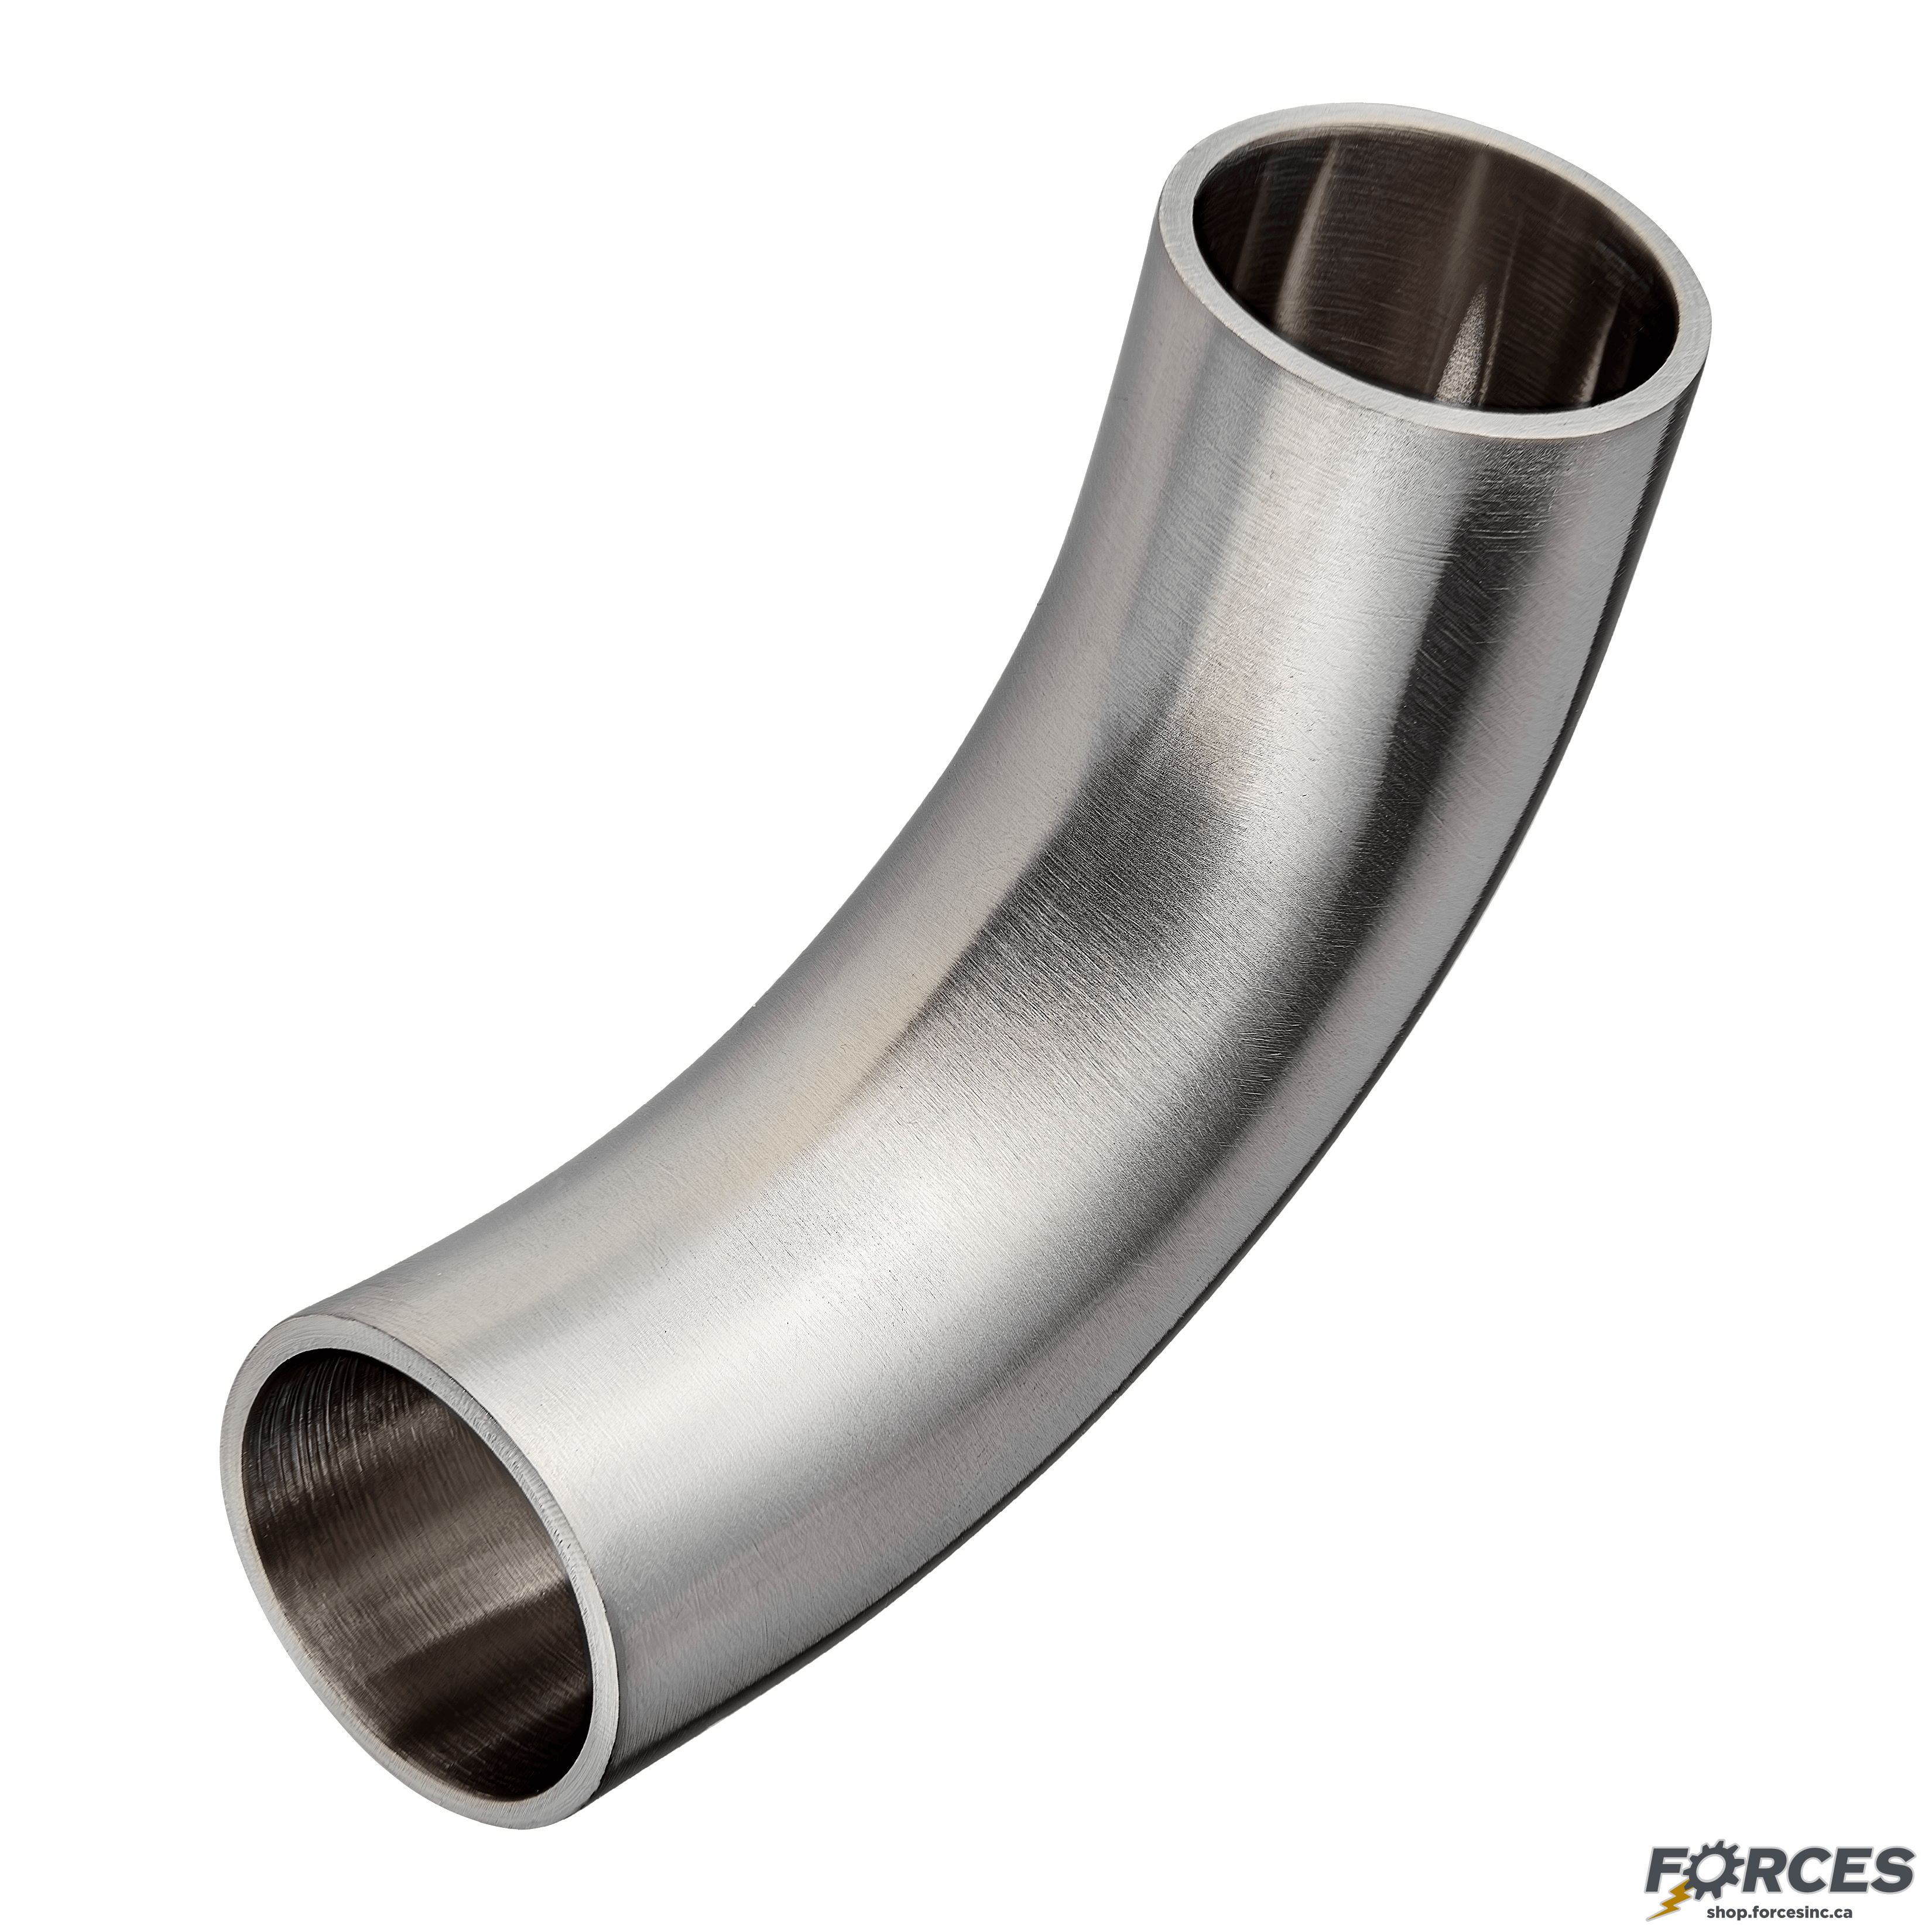 1/2" Butt Weld 90° Elbow Long Tangent - Stainless Steel 316 - Forces Inc